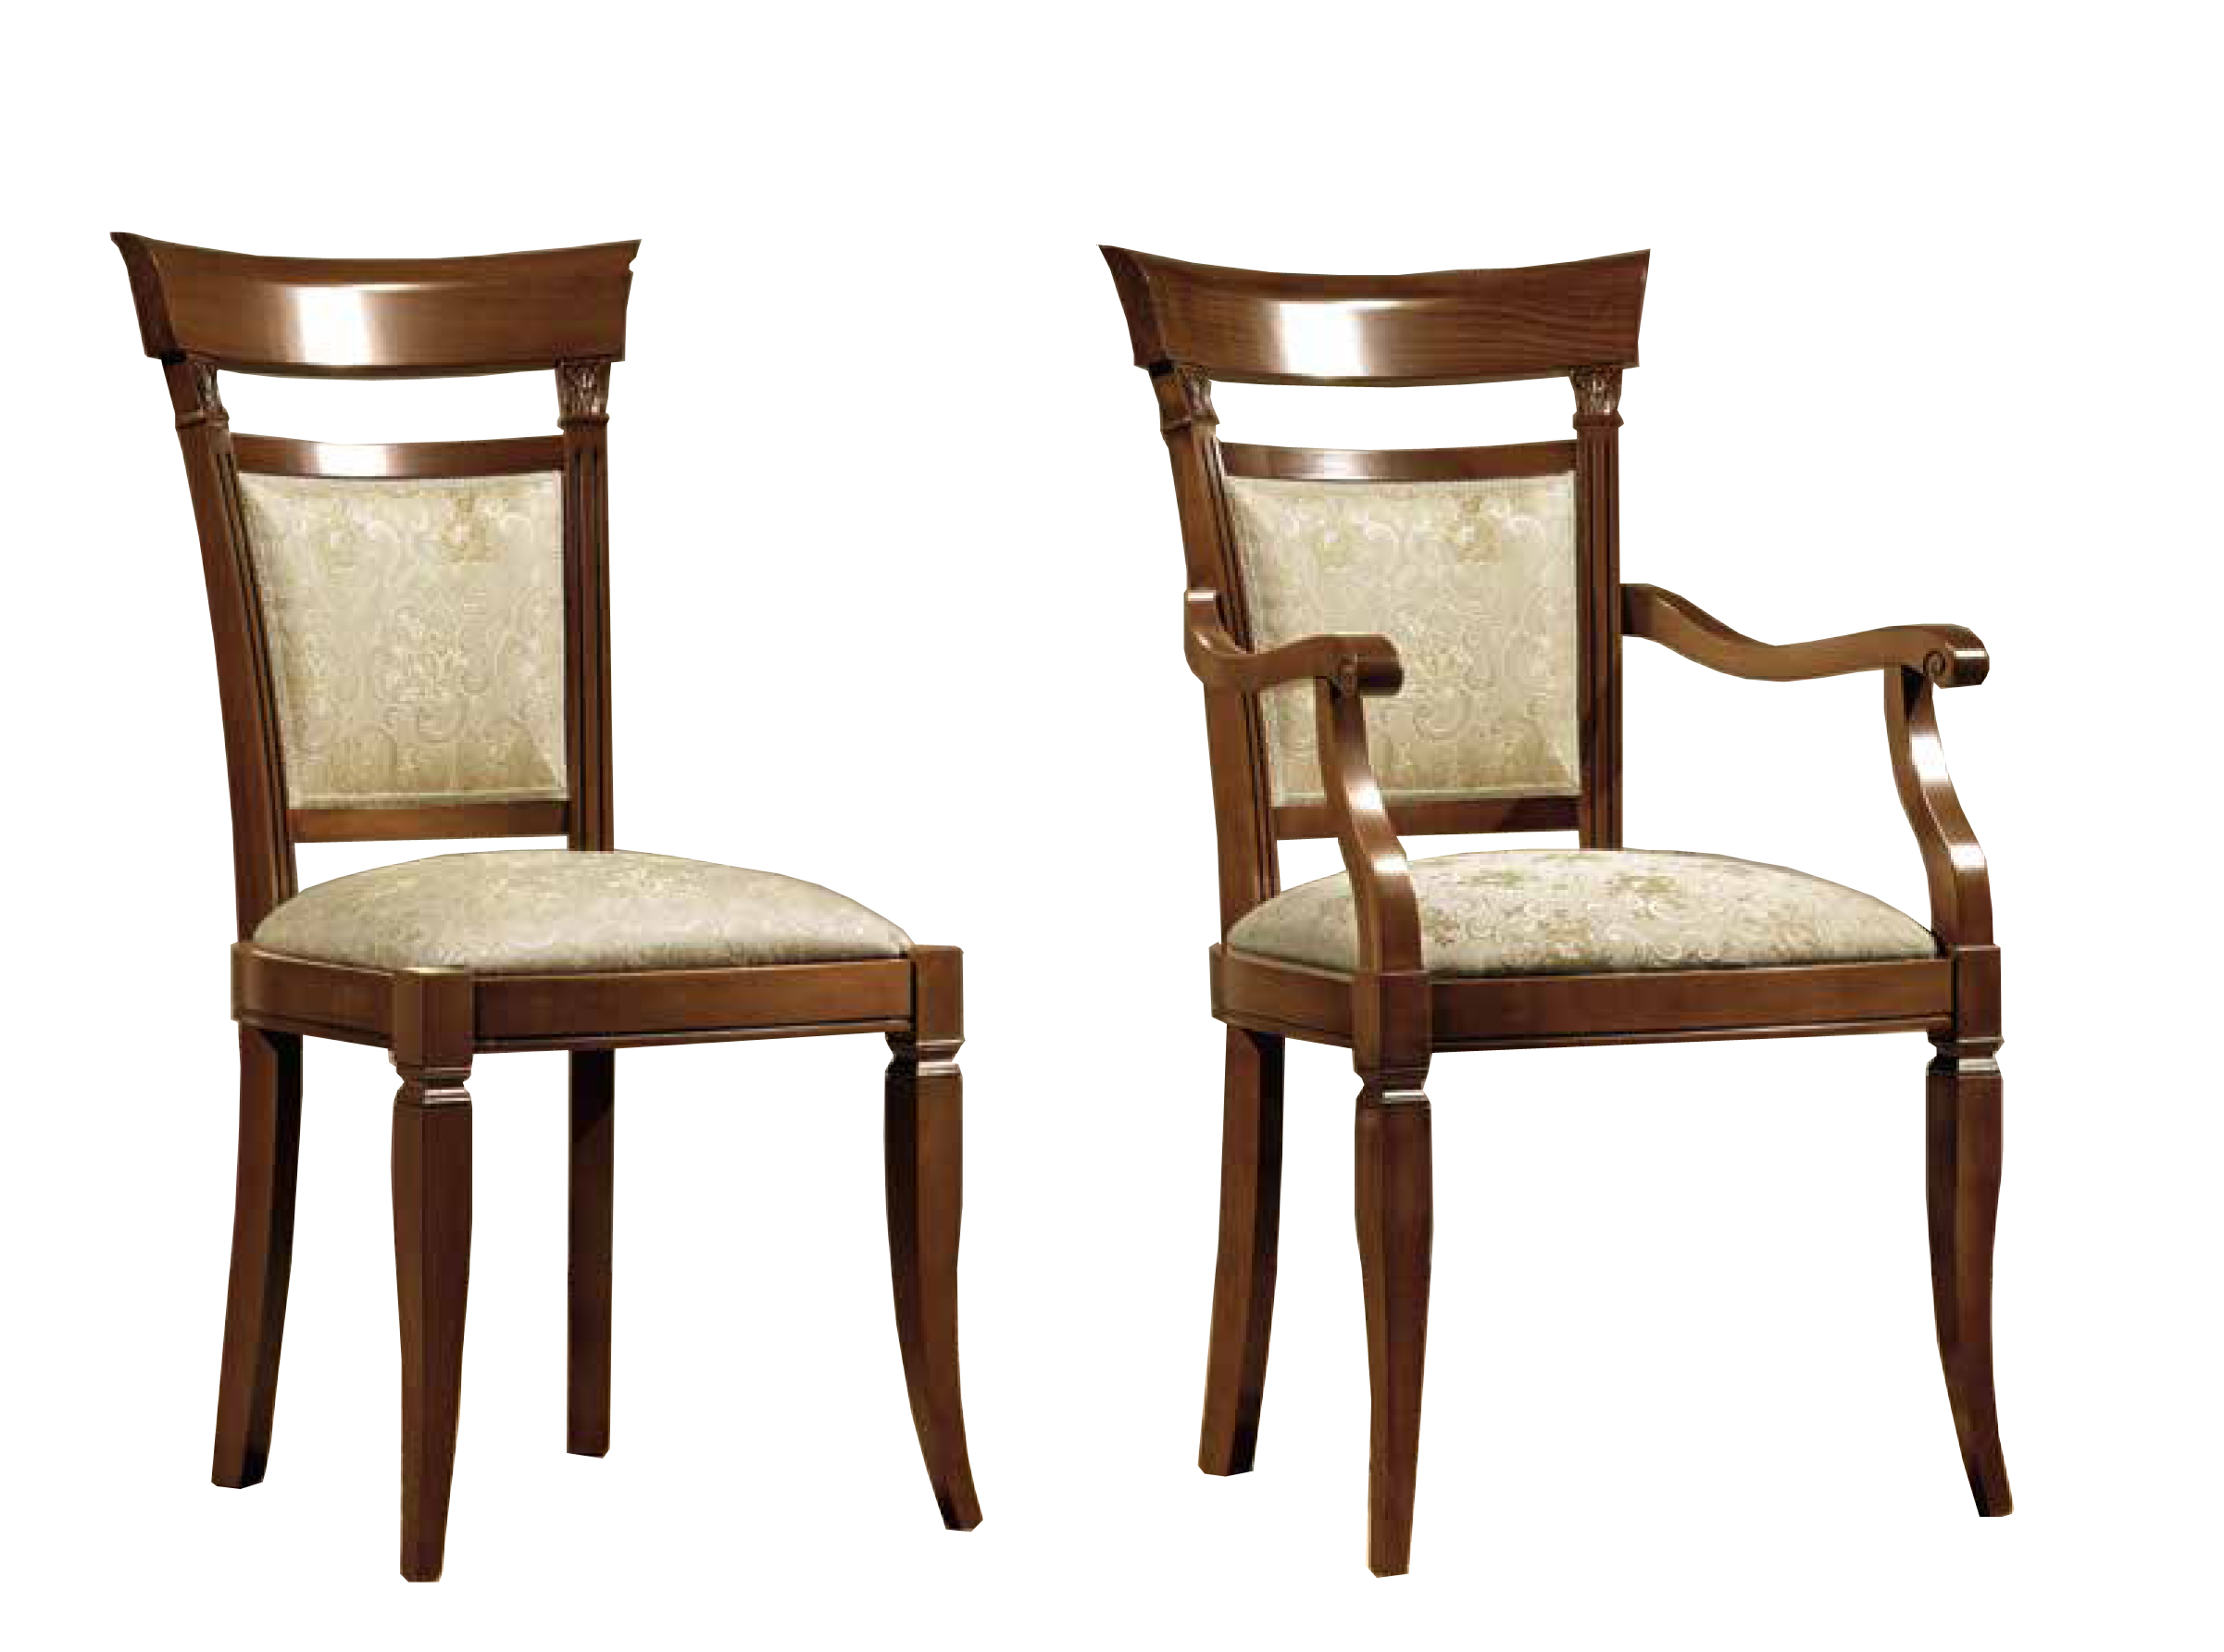 Brands Motif, Spain Treviso Chairs Cherry